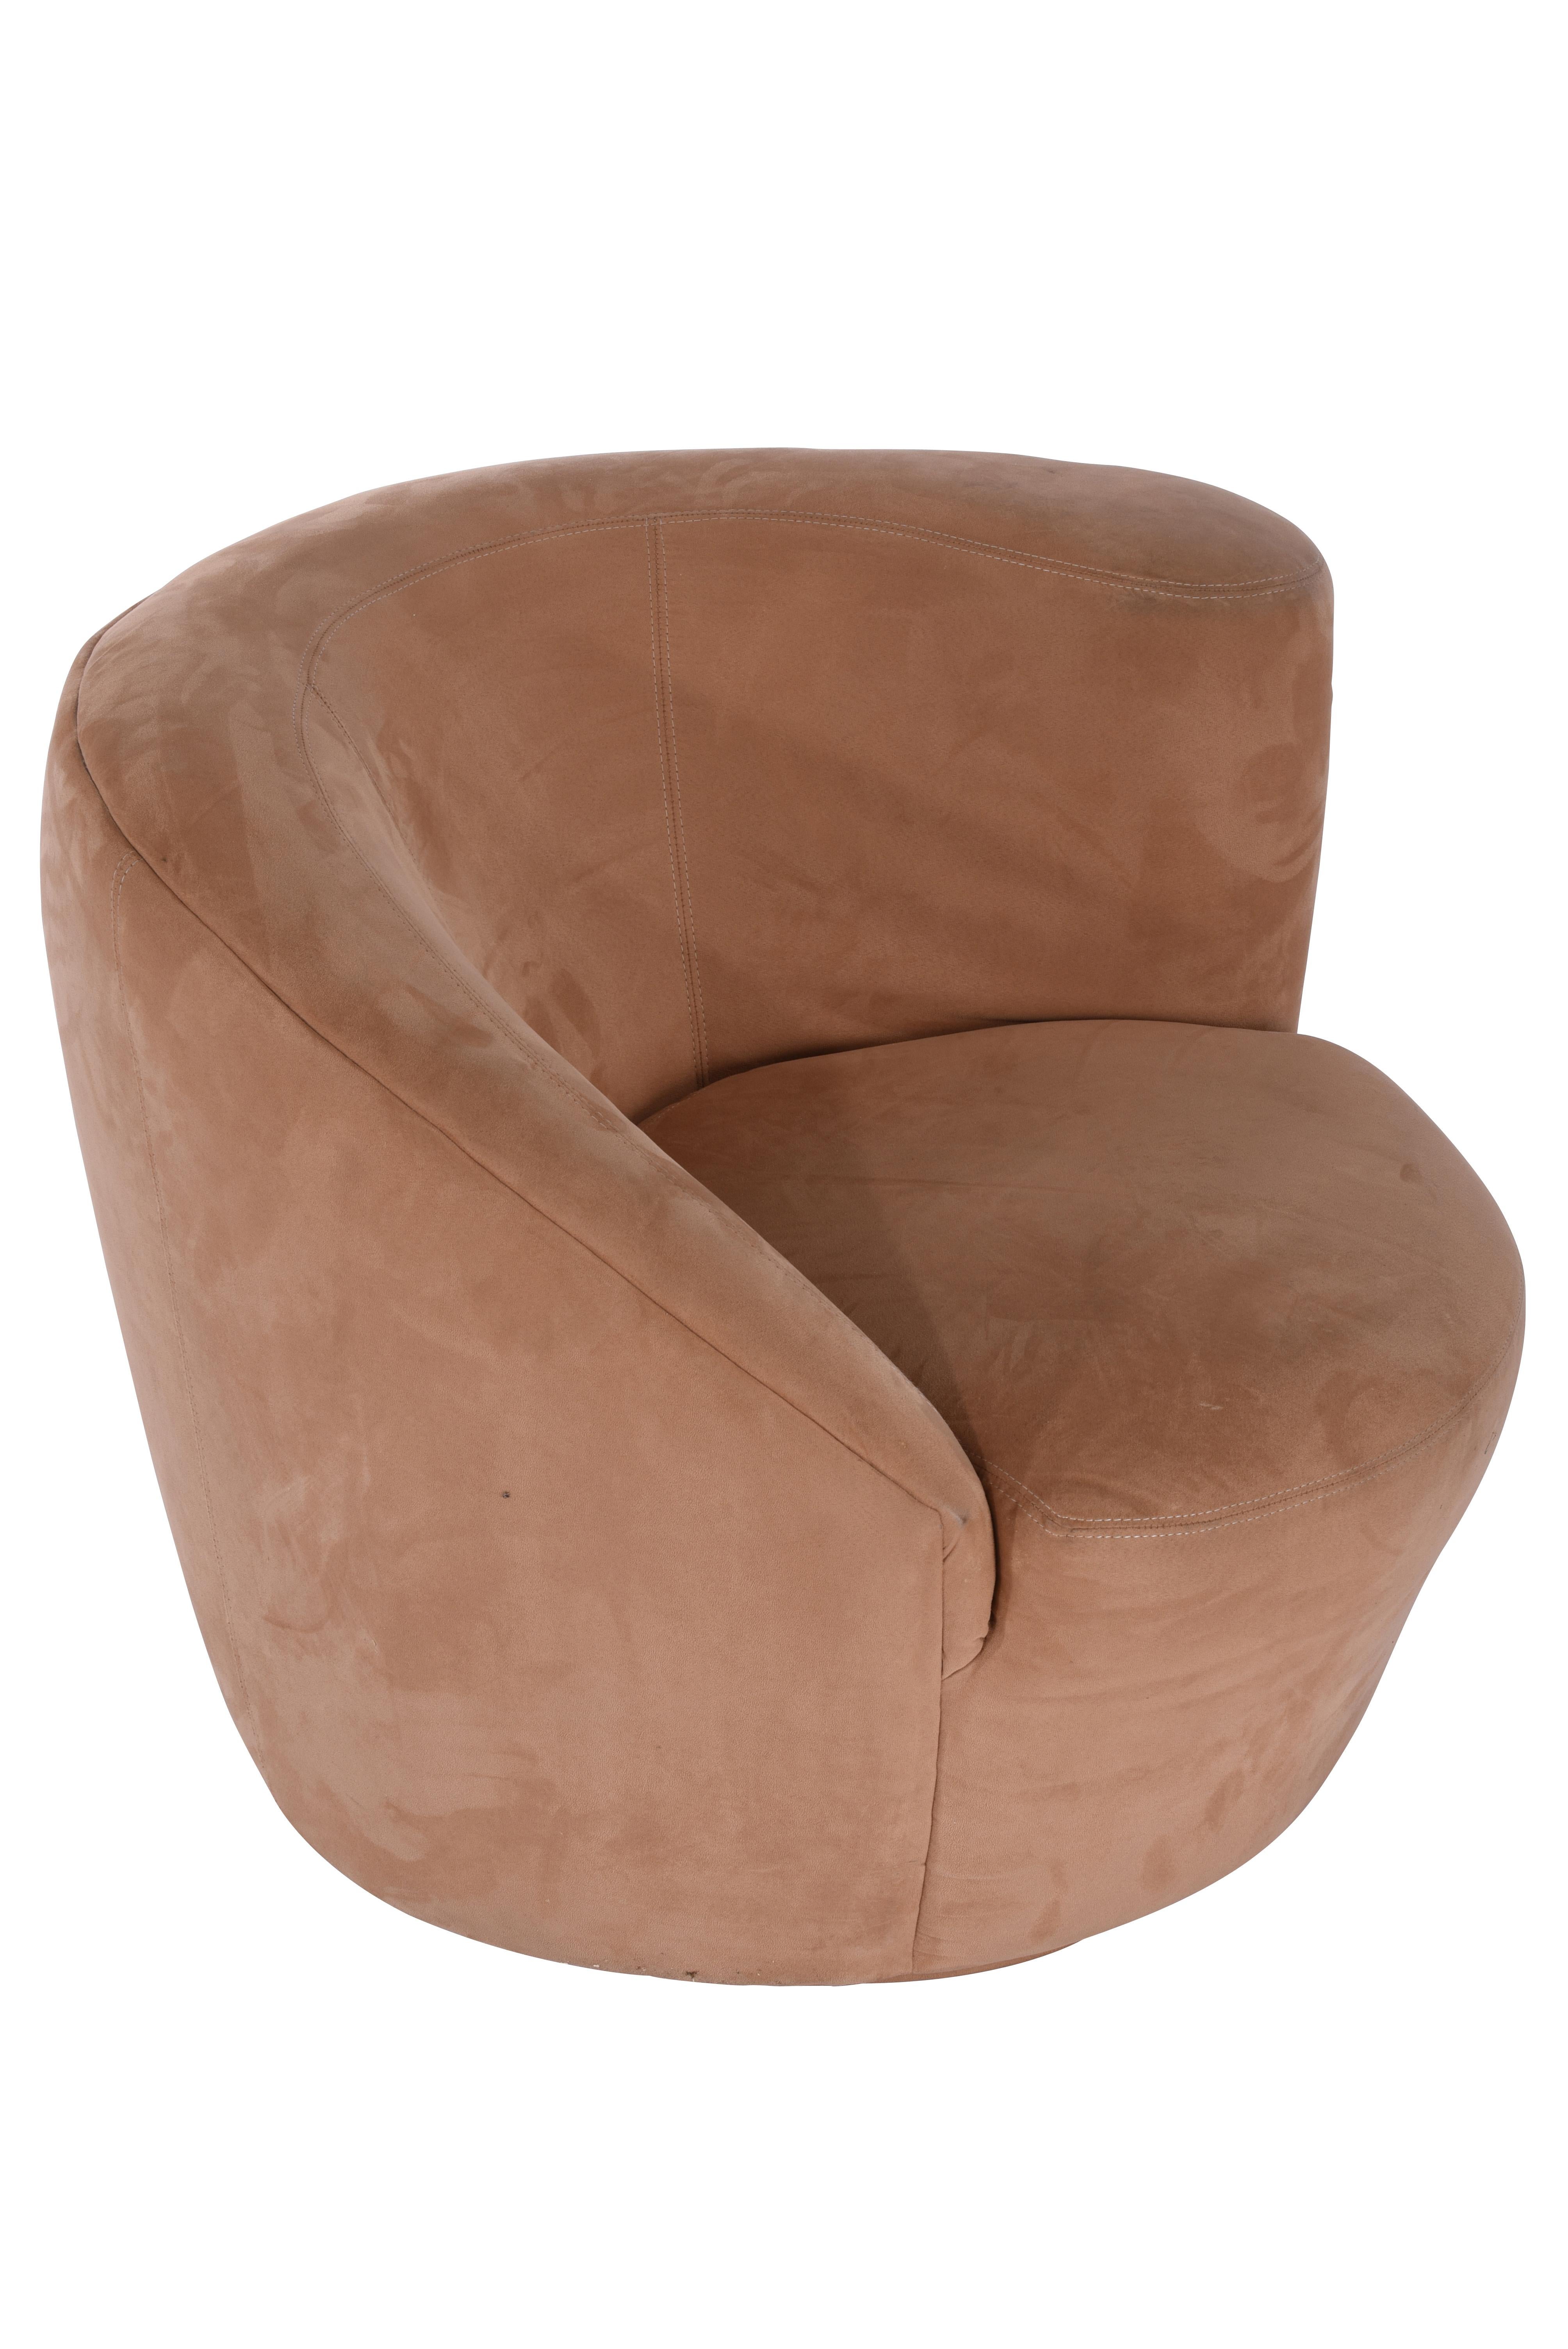 Vladimir Kagan Nautilus Swivel Chairs In Good Condition In Chicago, IL